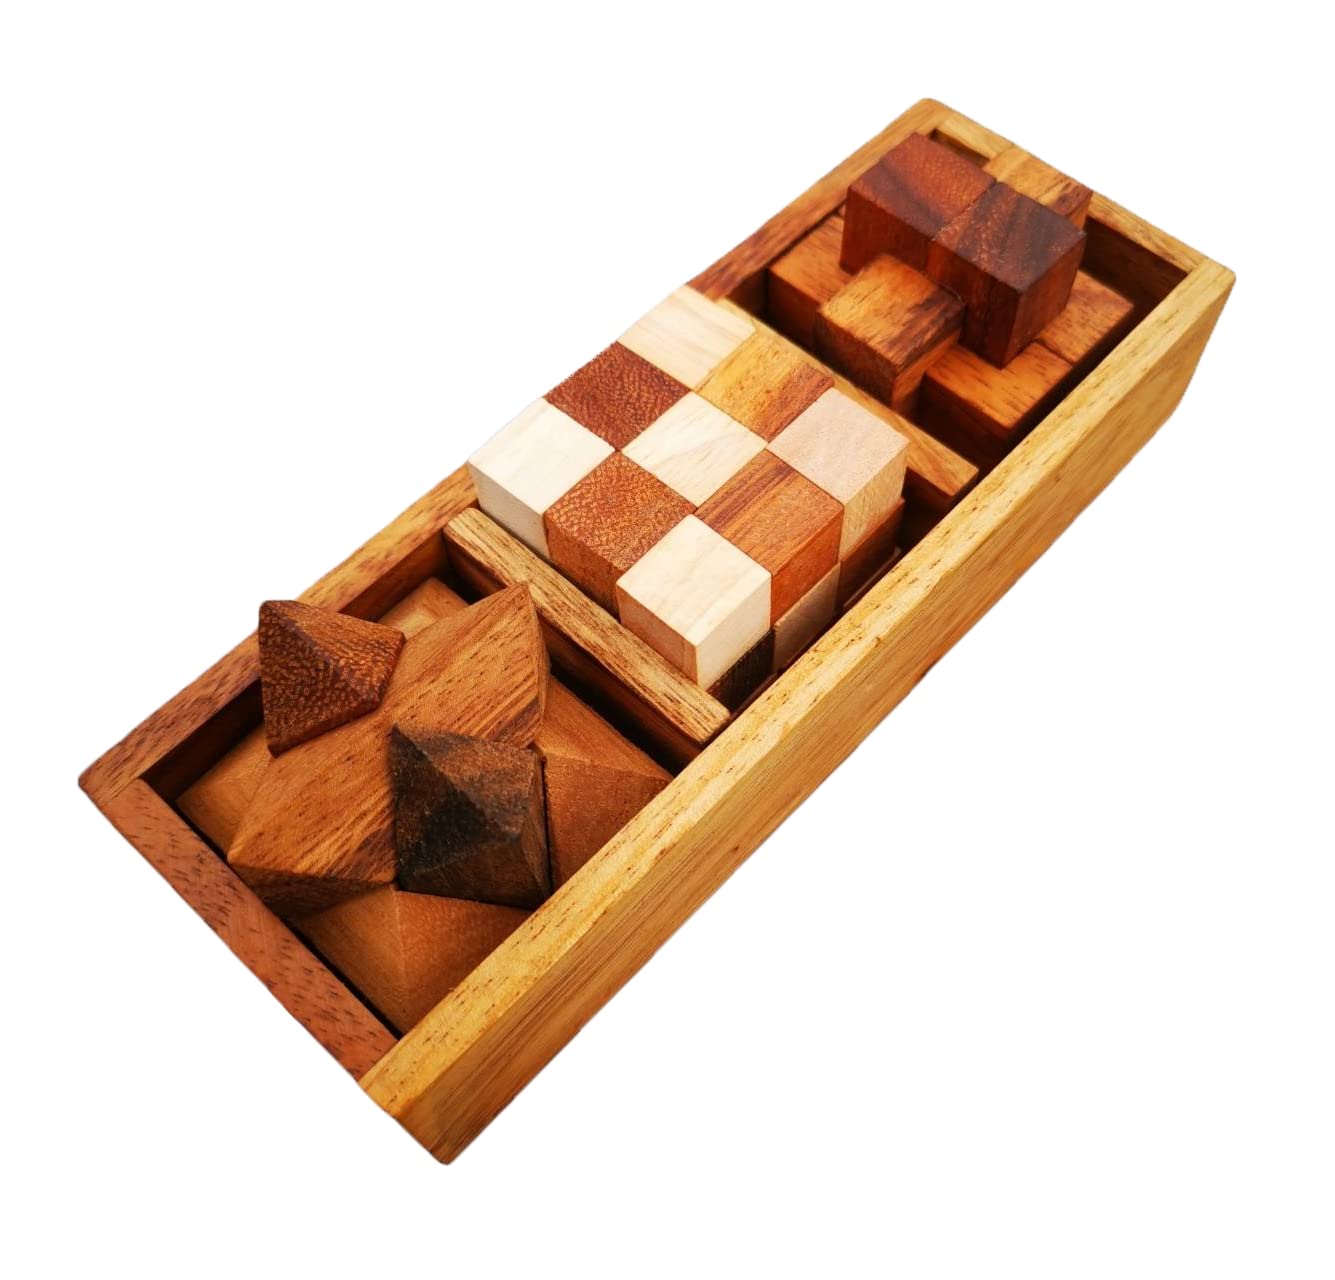 NUTTA - 3 in 1 Set Wooden Games Brain Teaser Wood Toy Desk Puzzle Coffee Table Decor Broad Game 3D Puzzles for Teens and Adults Fun Games Indoor